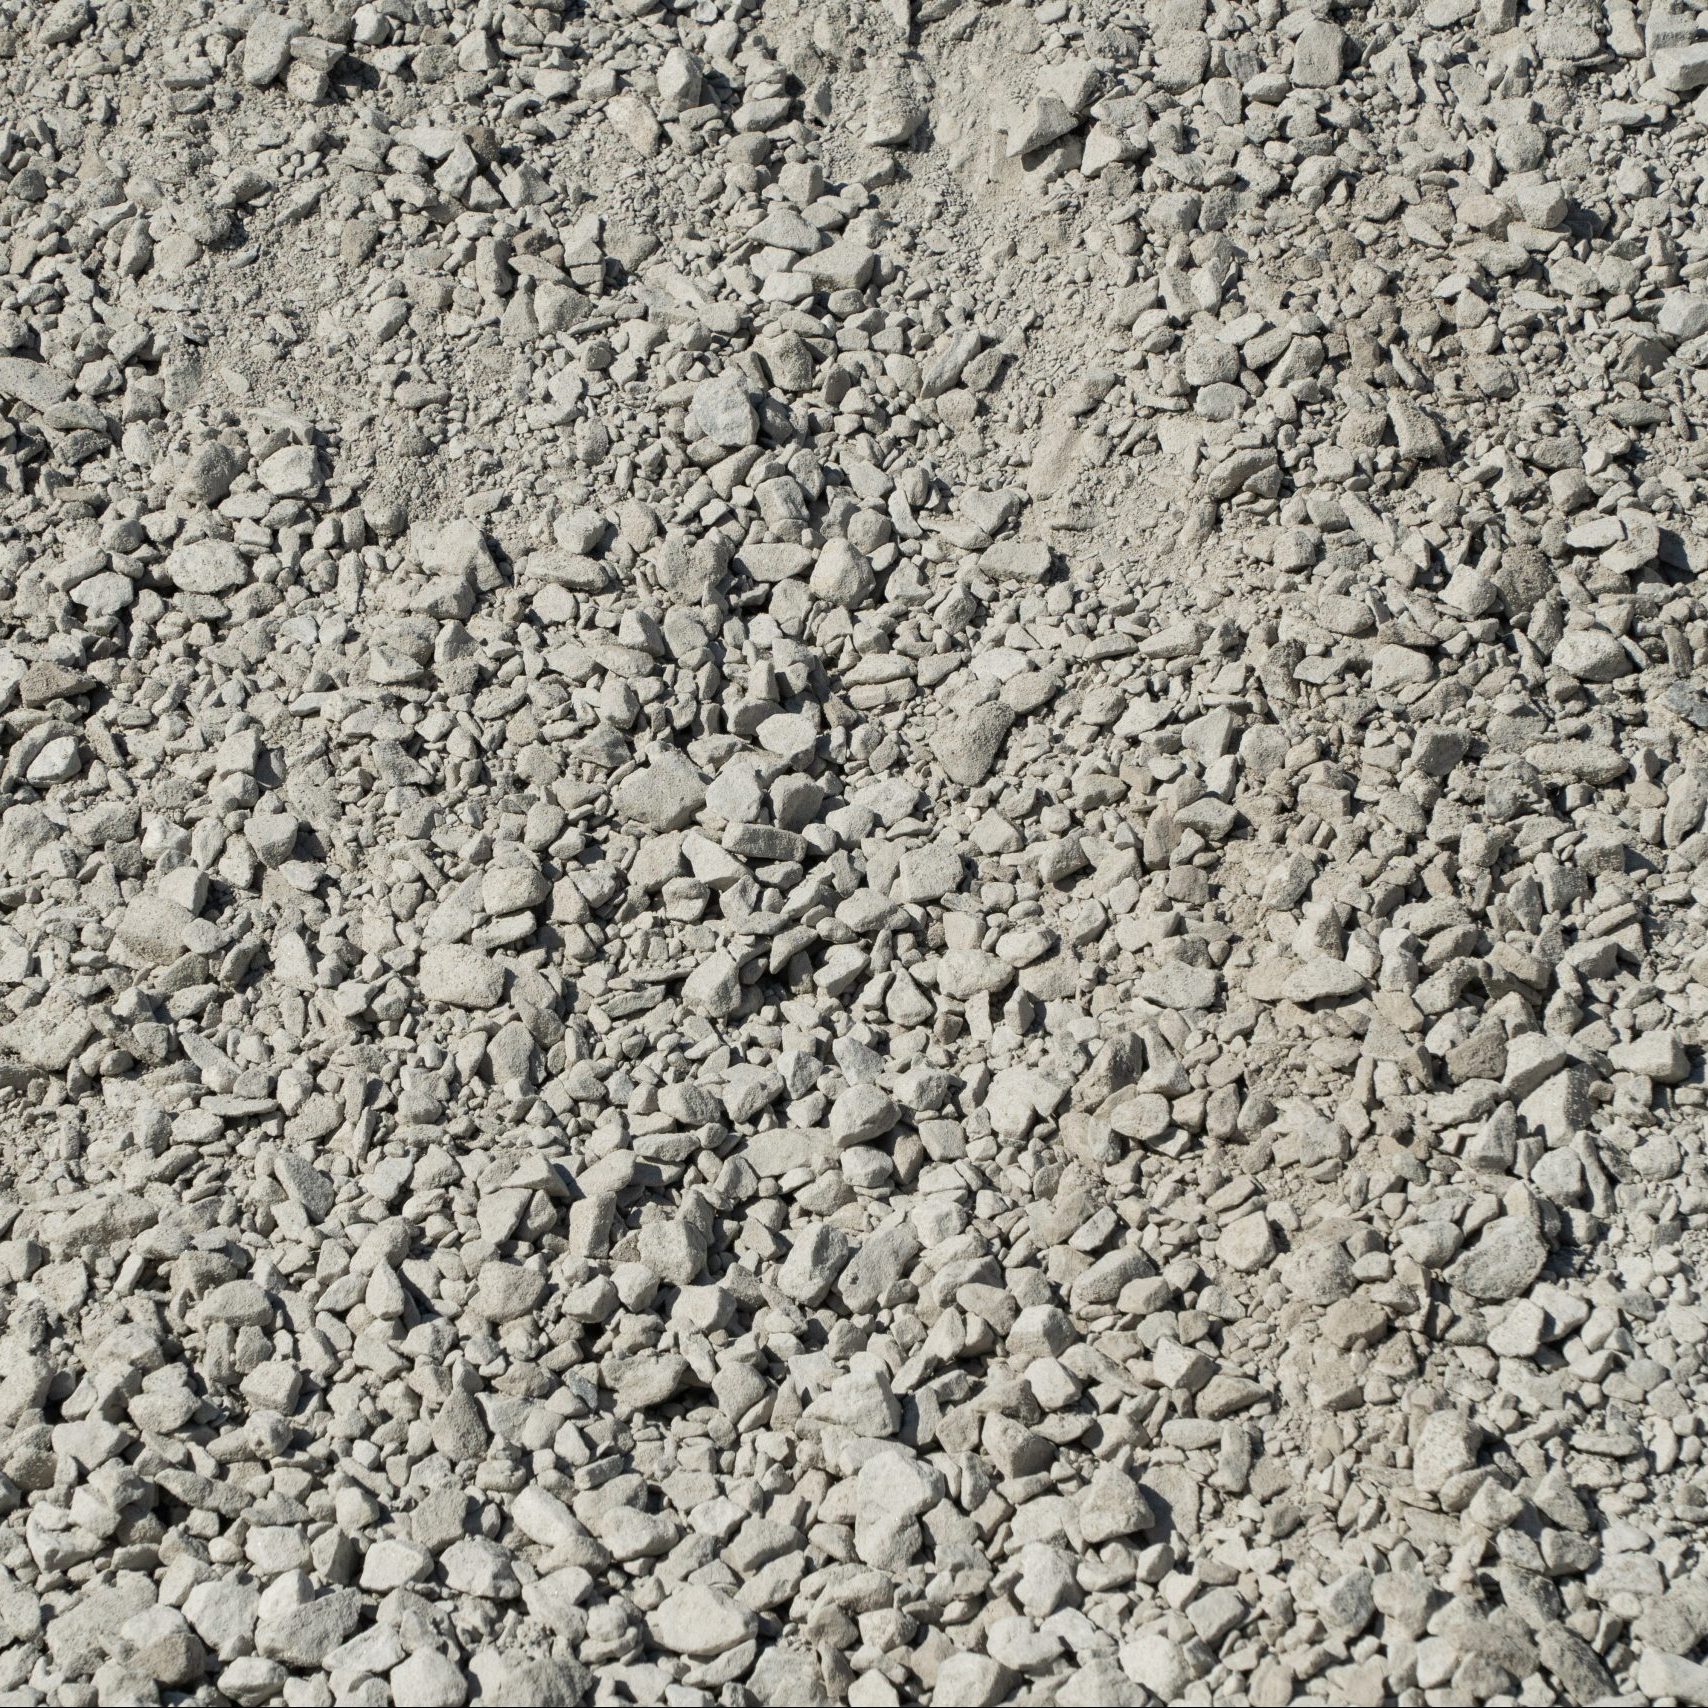 A mix of three-quarter inch crushed stone and gravel